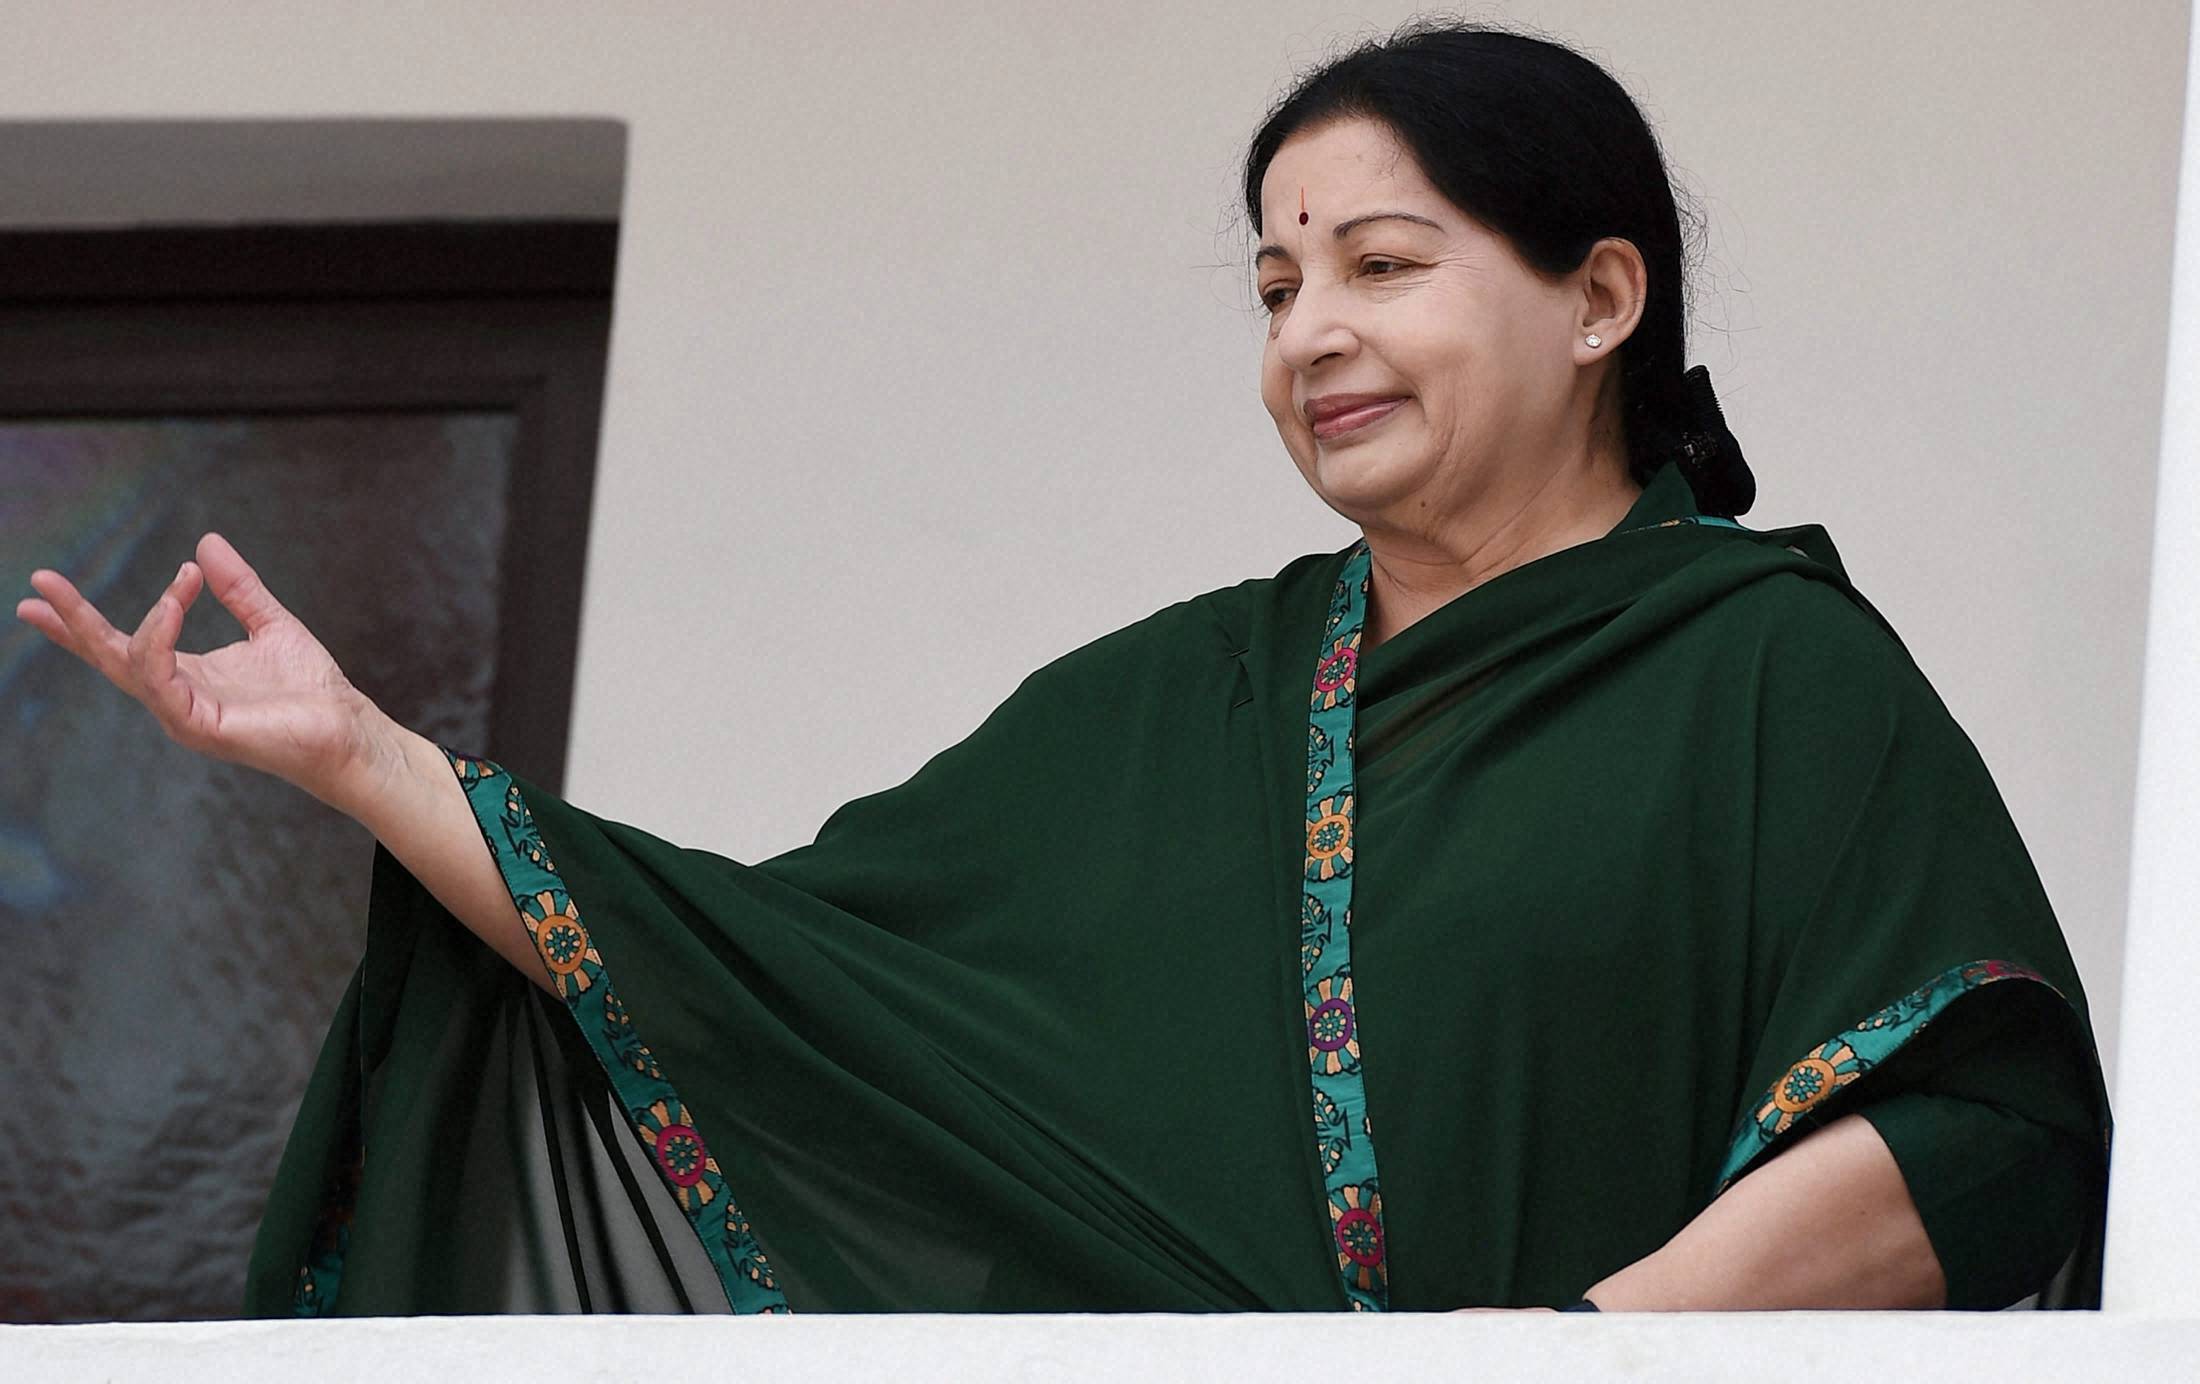 Jayalalithaa Becomes The First Tamil Nadu CM To Be Re-Elected In 30 Years